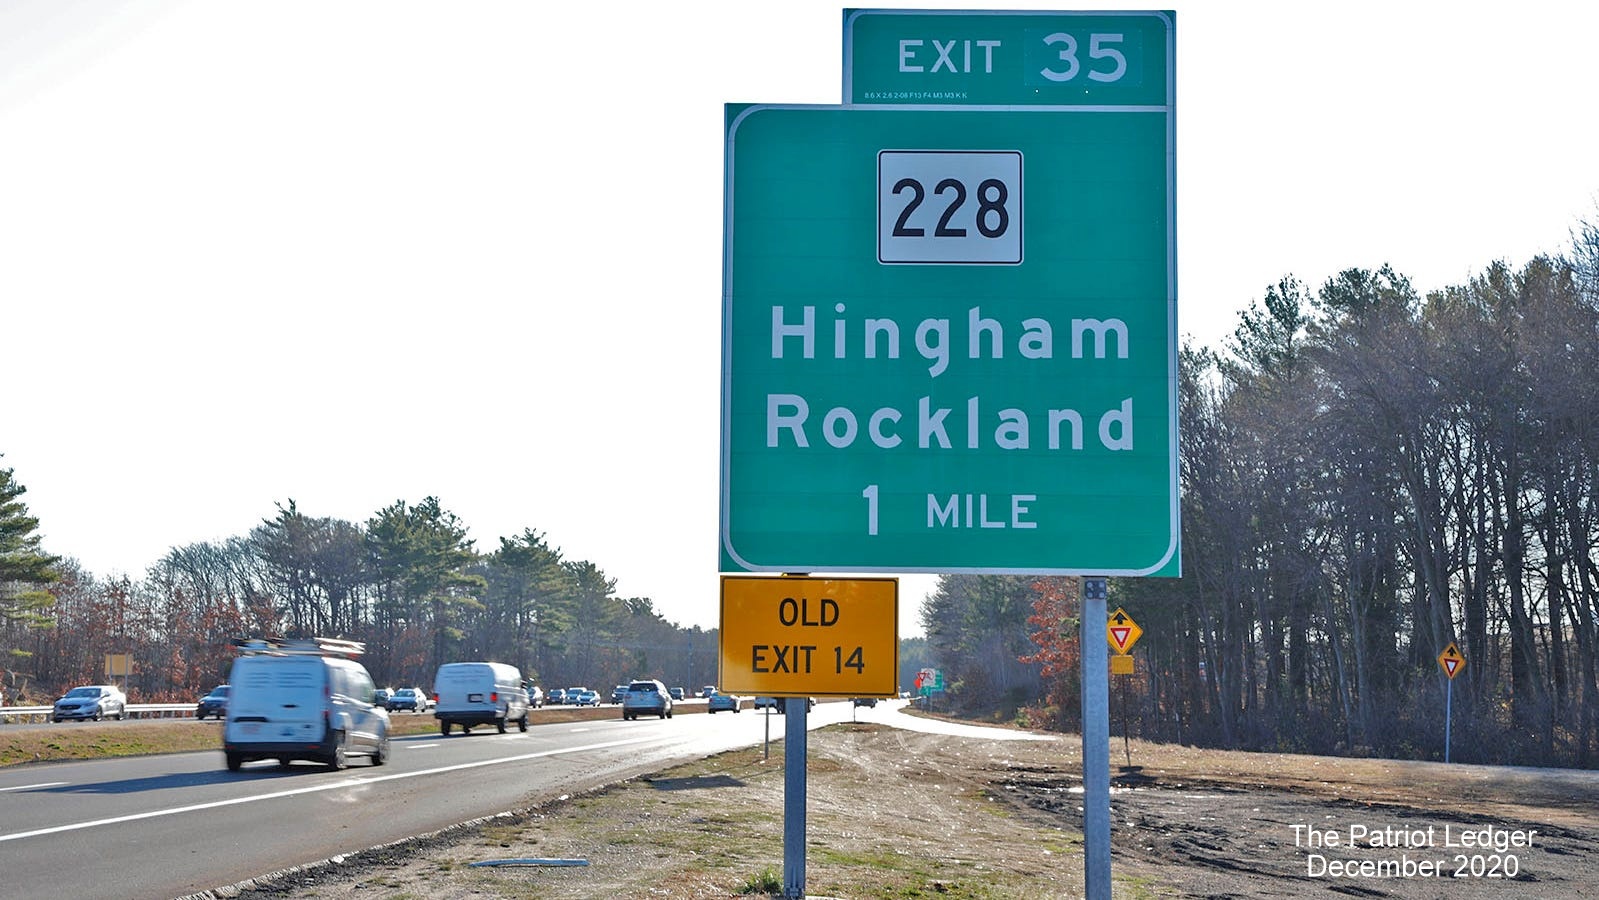 Image taken by the Patriot Ledger of 1-Mile advance sign for MA 228 exit with new milepost based exit number and yellow old exit number sign on left support on MA 3 South in Hingham, December 2020